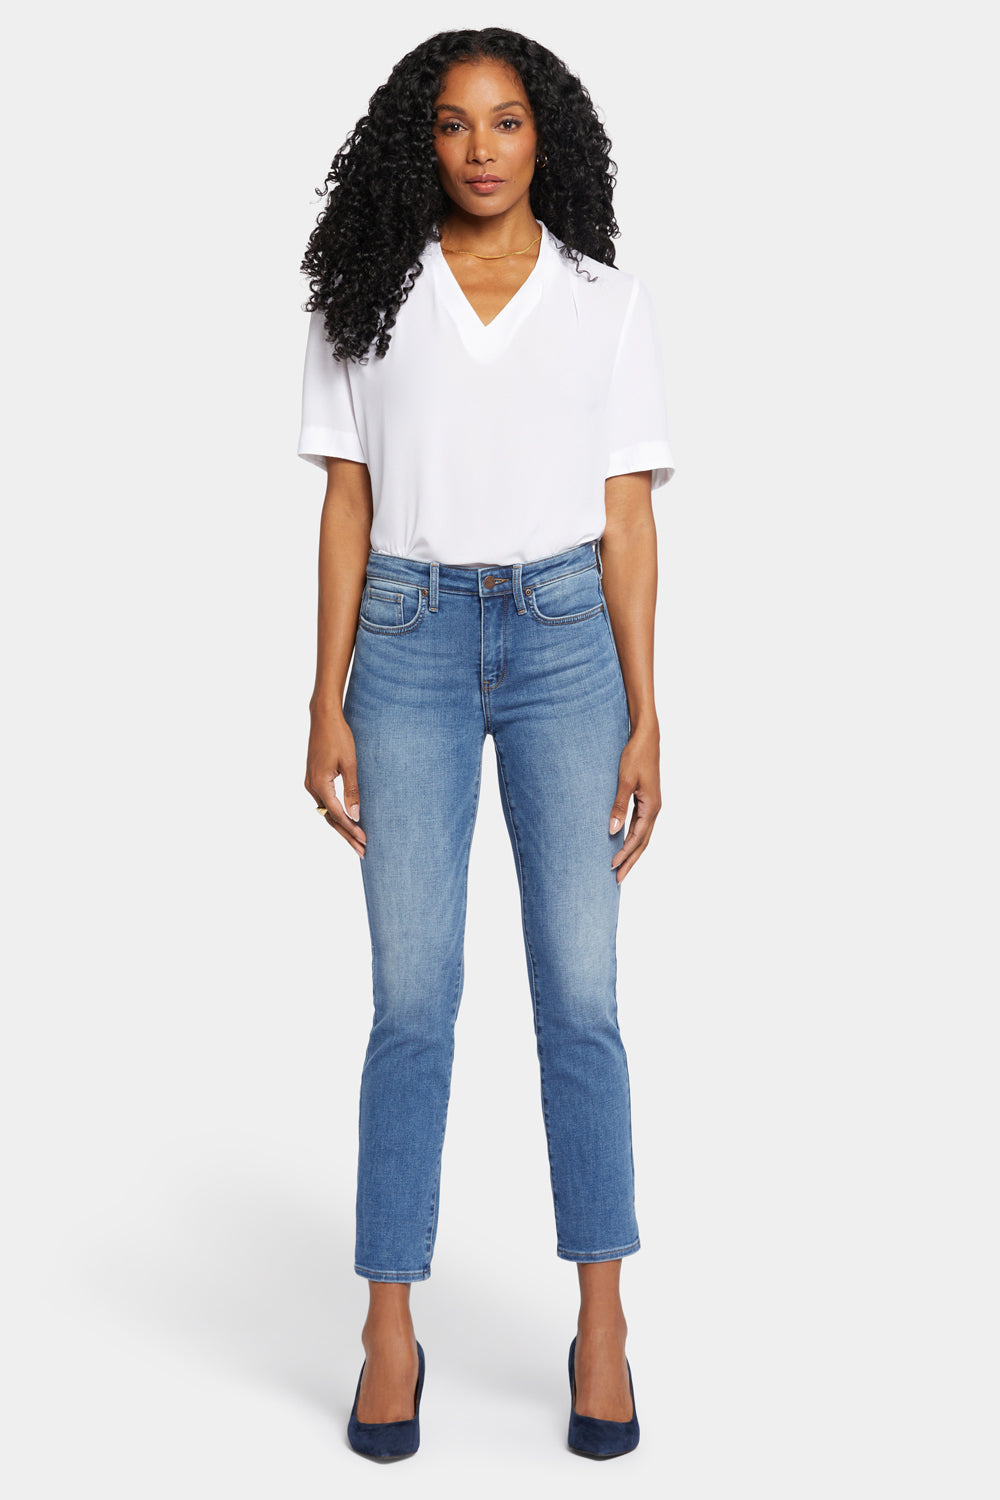 ankle length jeans and tops